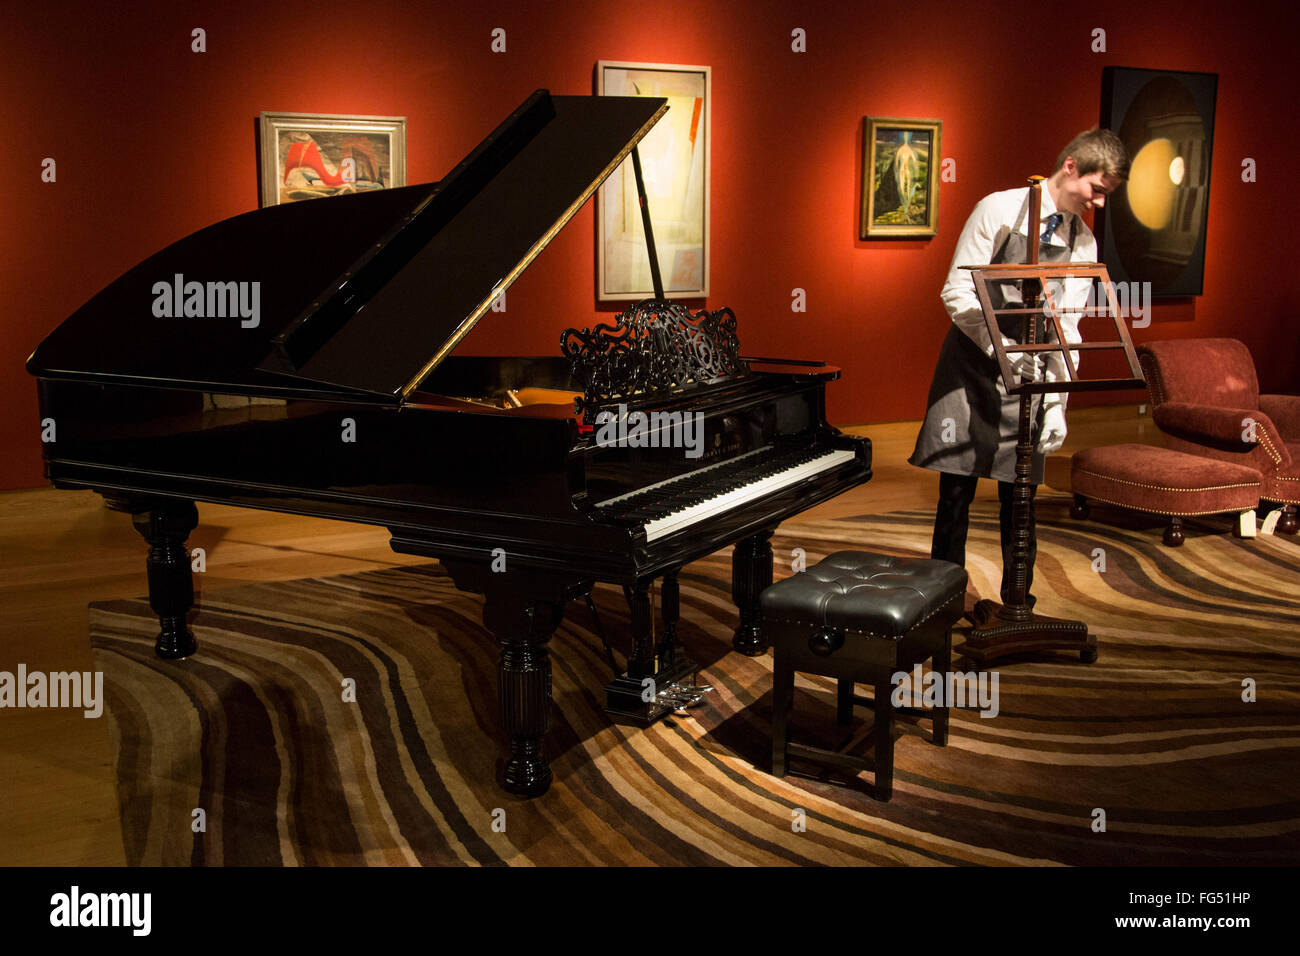 London, UK. 17 February 2016. Pictured: Sting's Steinway Grand Piano, a  German ebonised Model B grand piano from Steinway & Sons, est. GBP  30,000-50,000 and a large swirl carpet by Paul Smith,